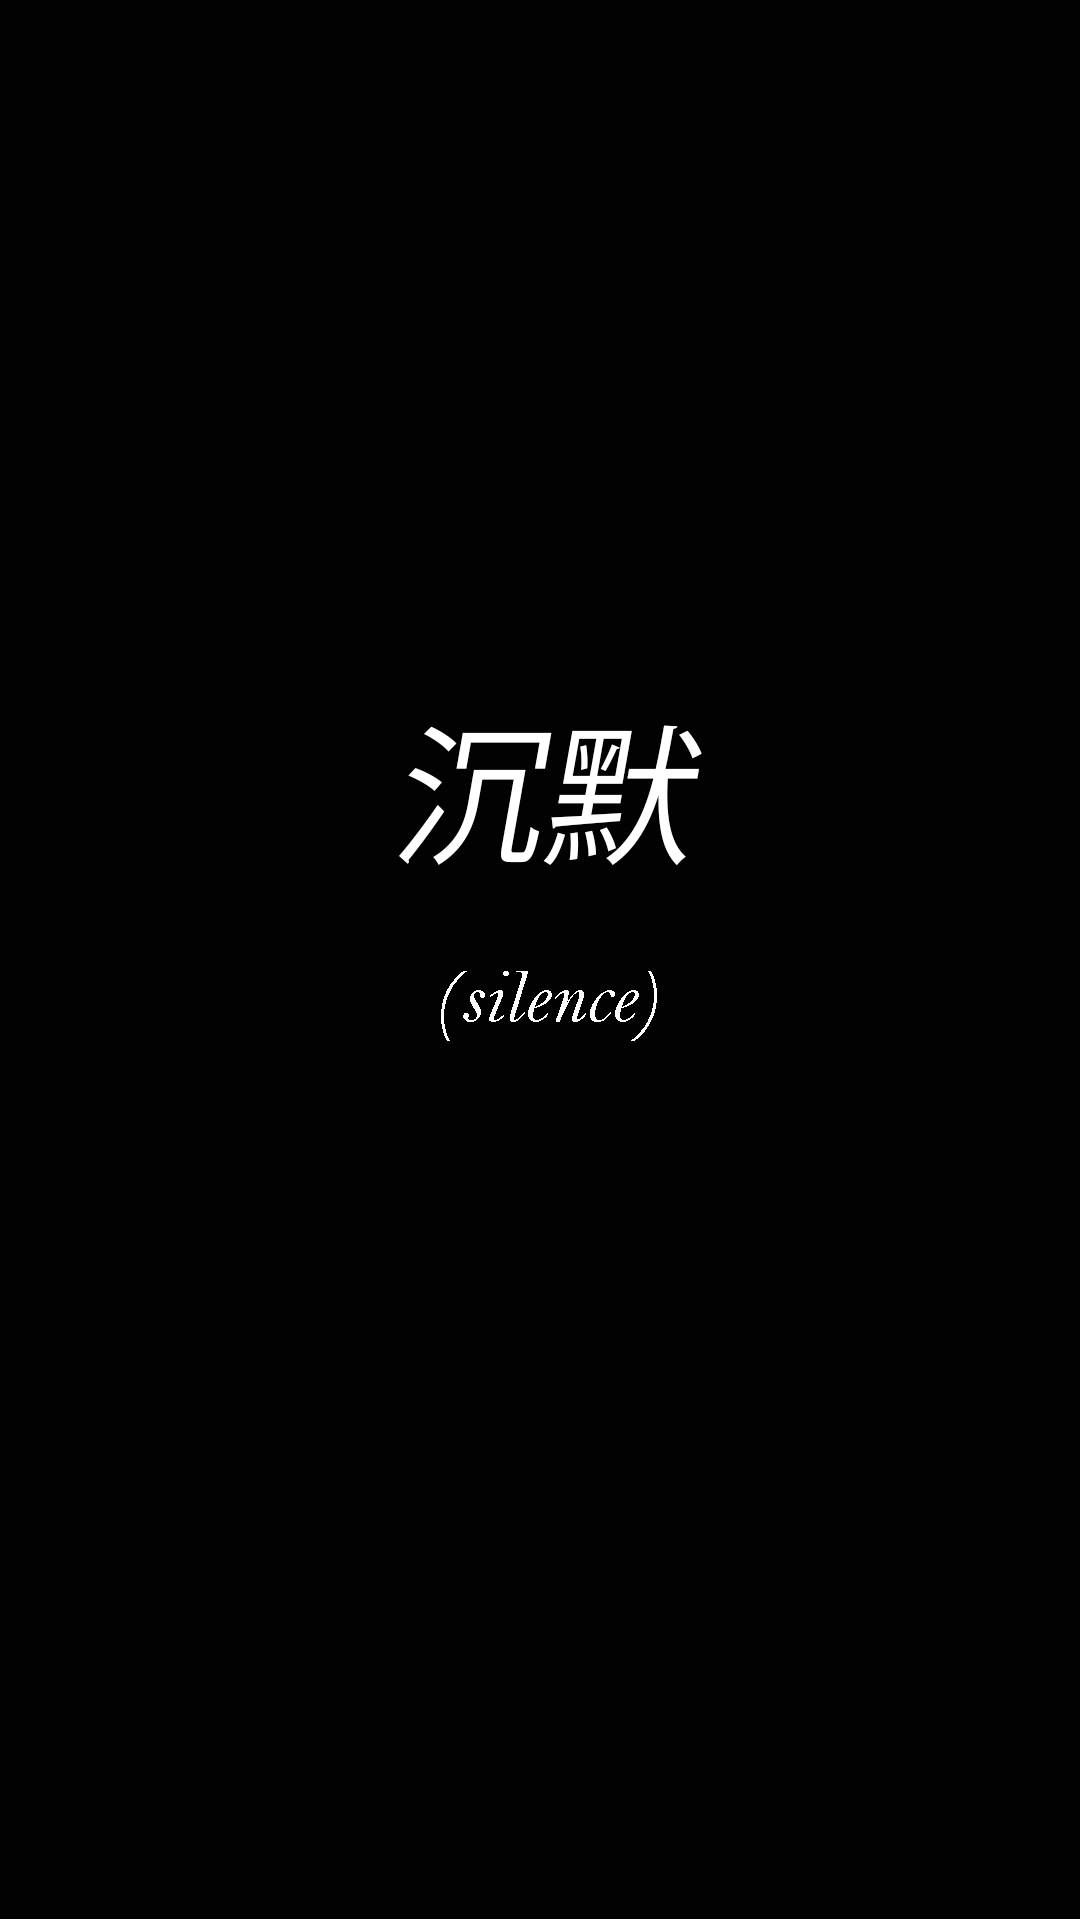 Lock Screens in Japanese quotes Japanese tattoo words